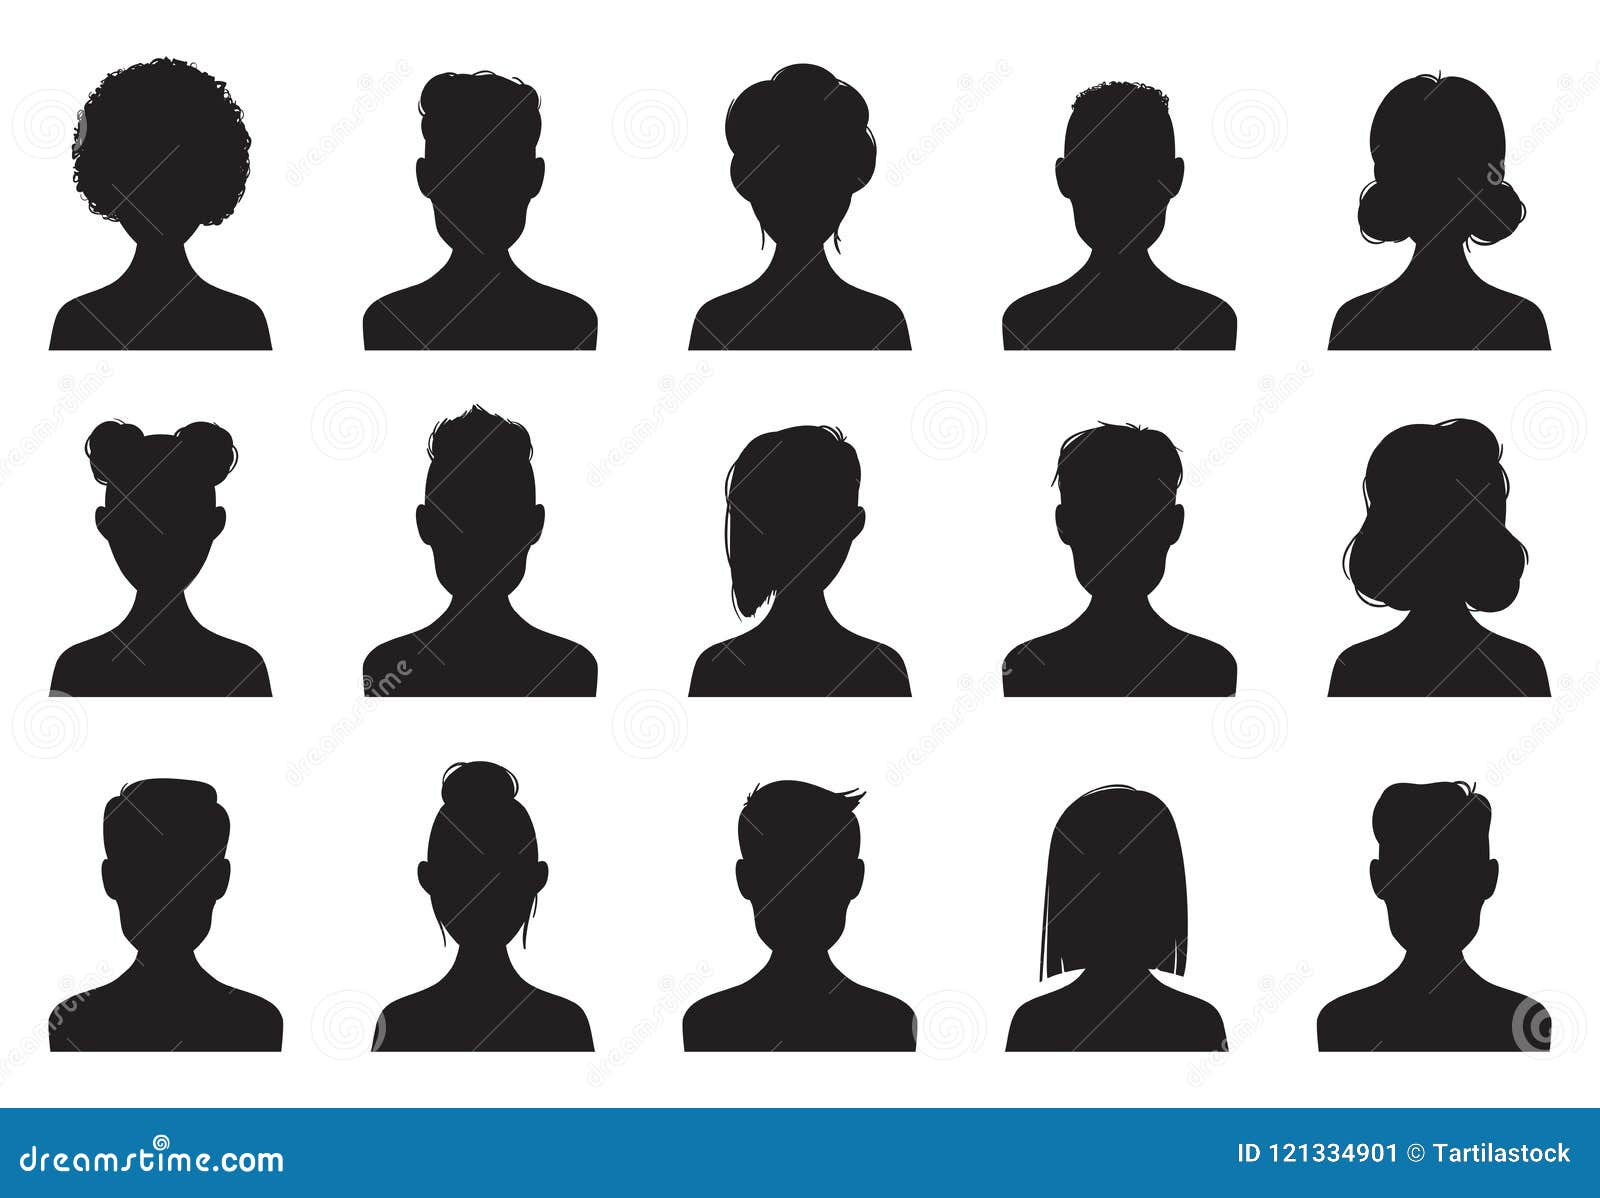 users silhouette icons. male and female head silhouettes. anonymous person heads avatar  icon set